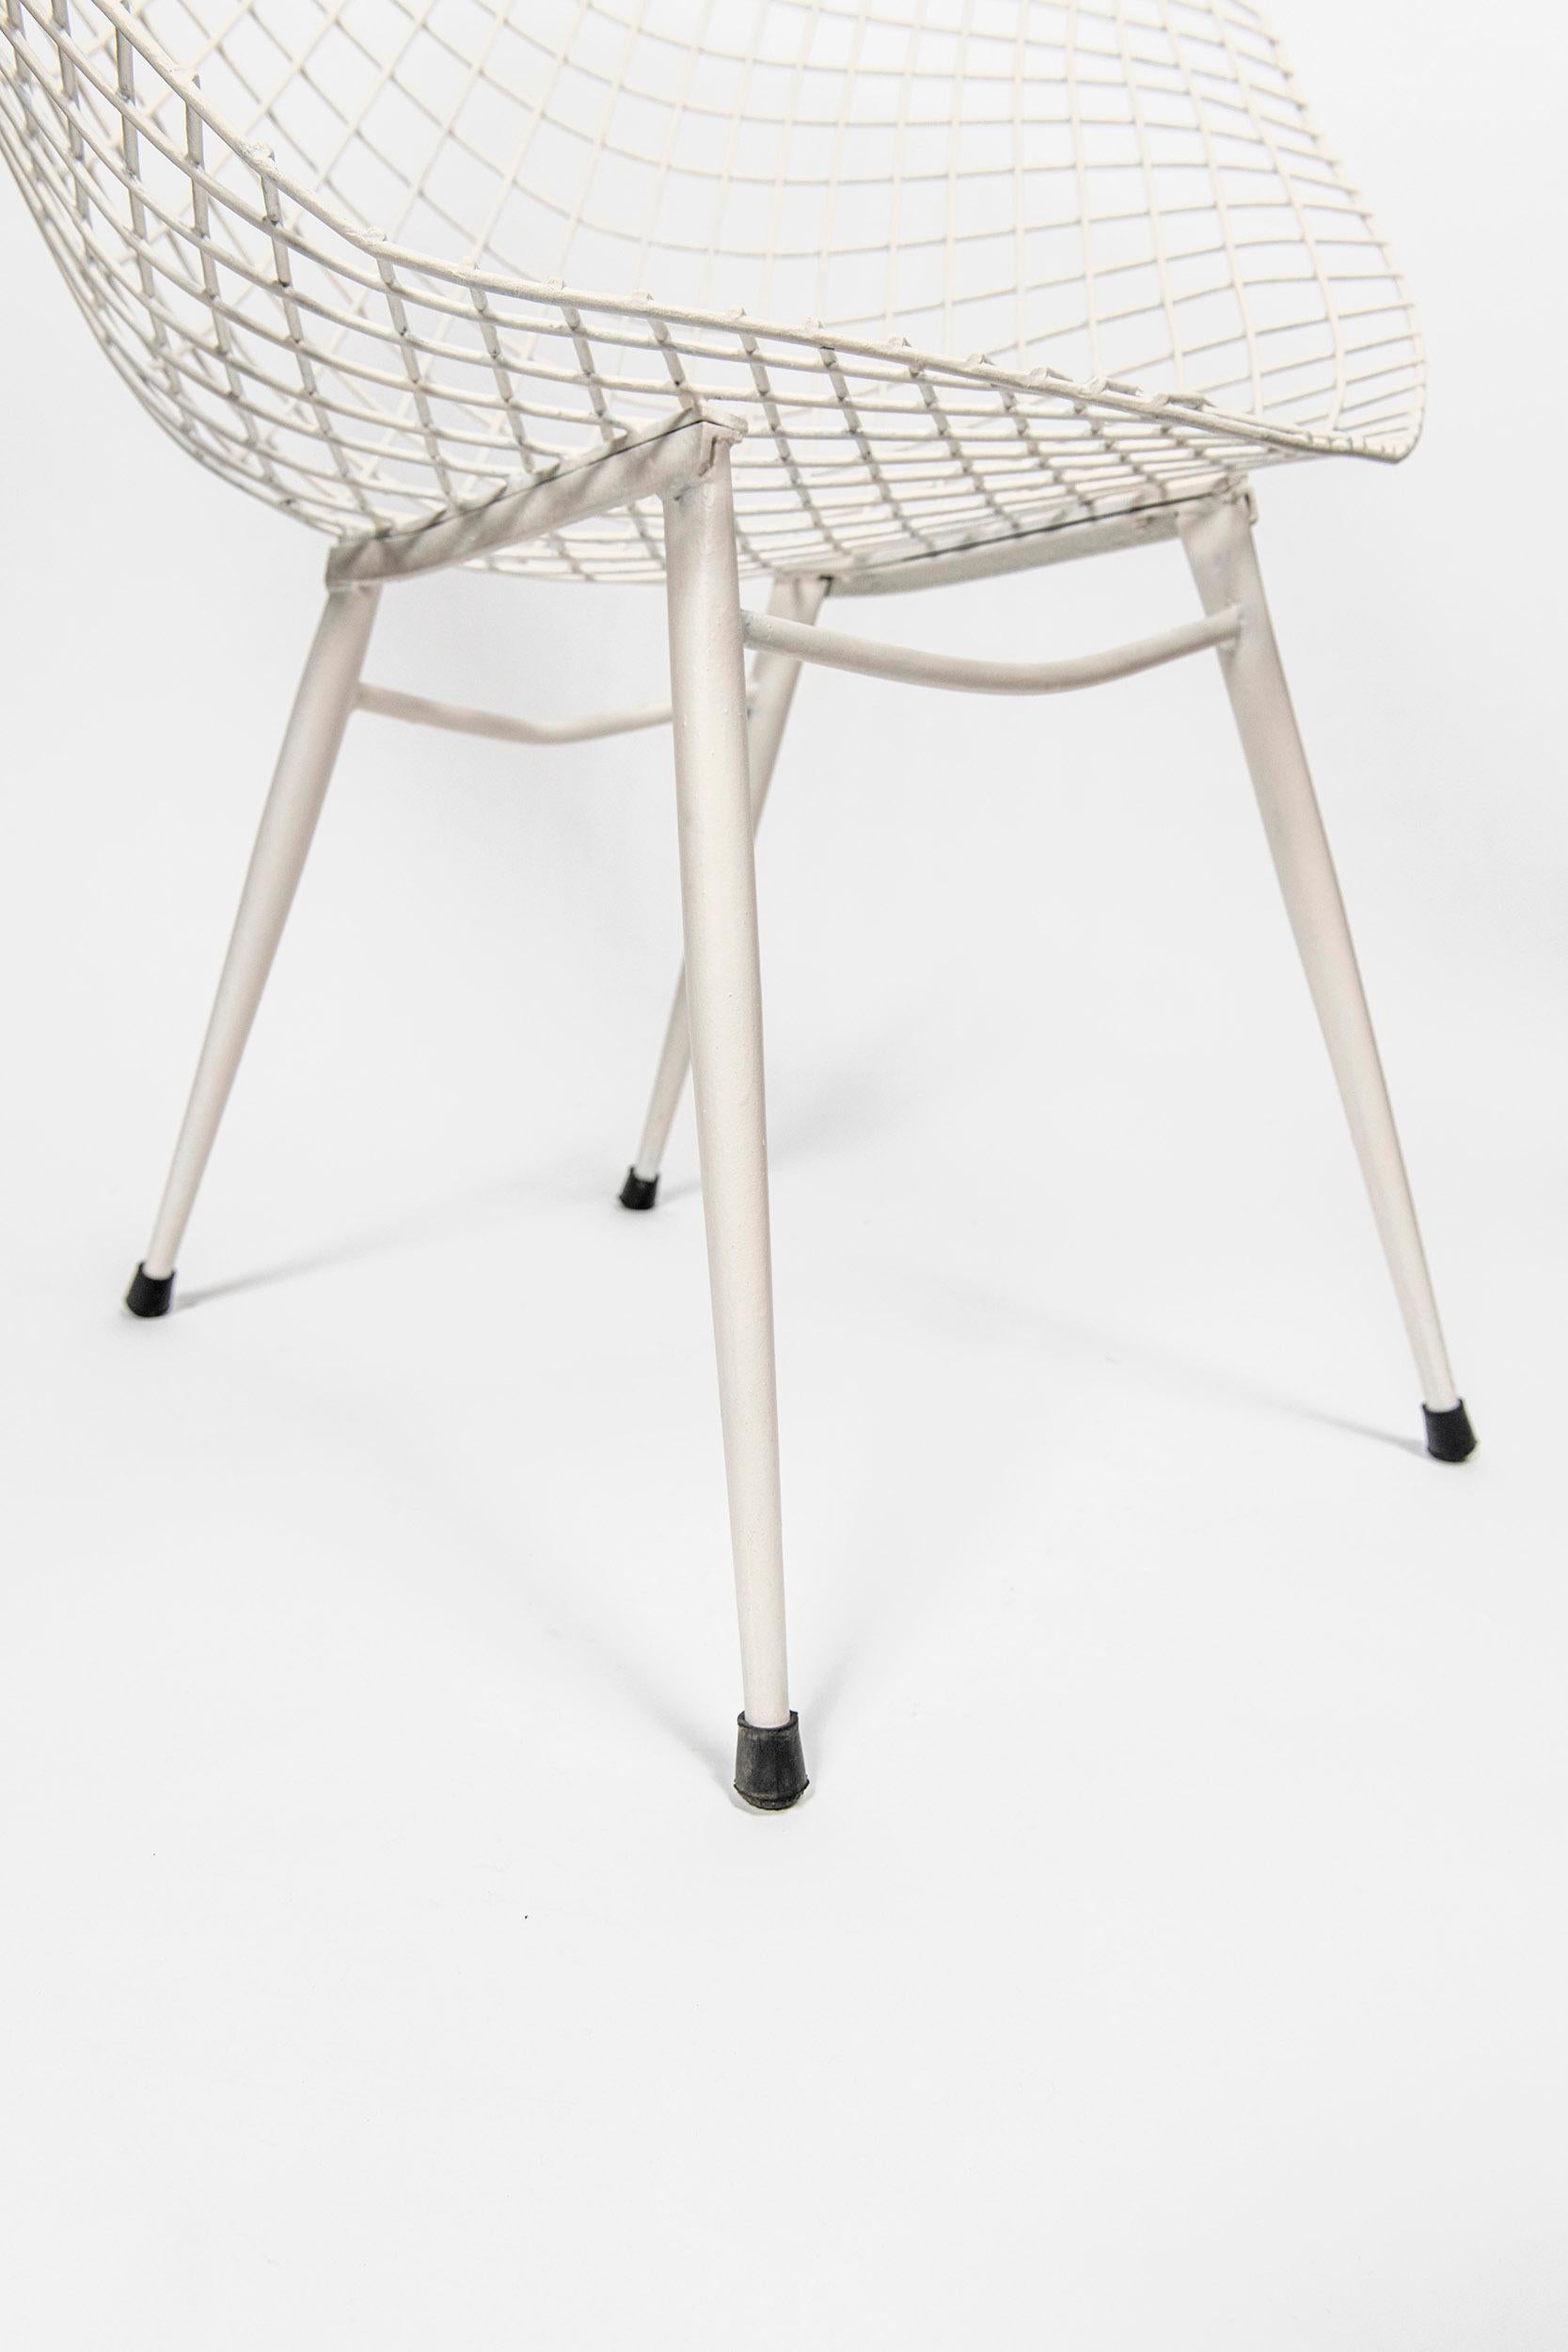 Steel Set of Four Diamond Chairs in the Style of Harry Bertoia, United States, C. 1960 For Sale